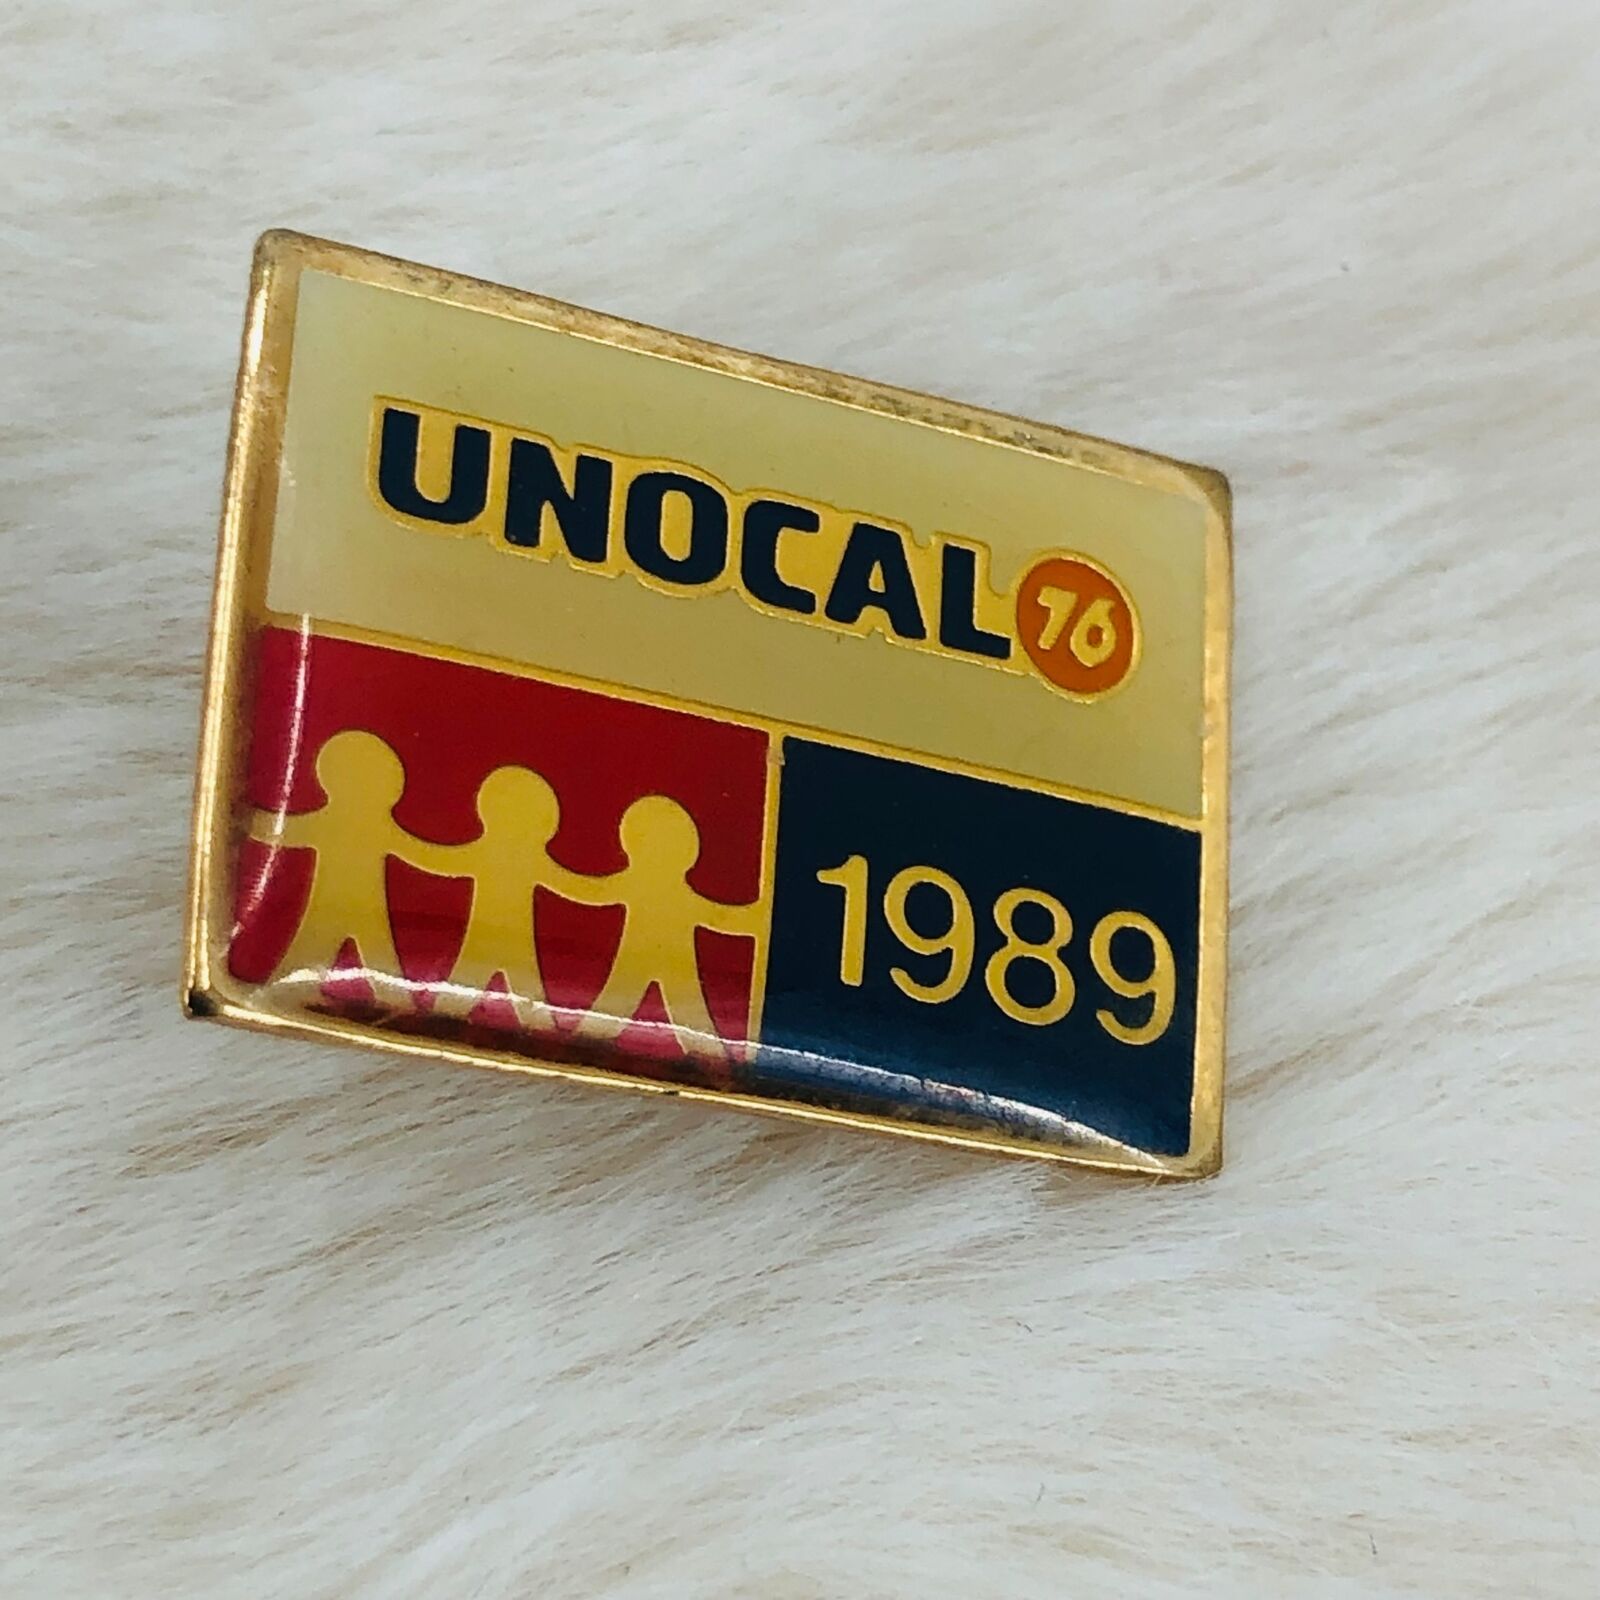 Vtg 1989 Unocal 76 Oil and Gas Advertising Enamel United Way Employee Lapel Pin